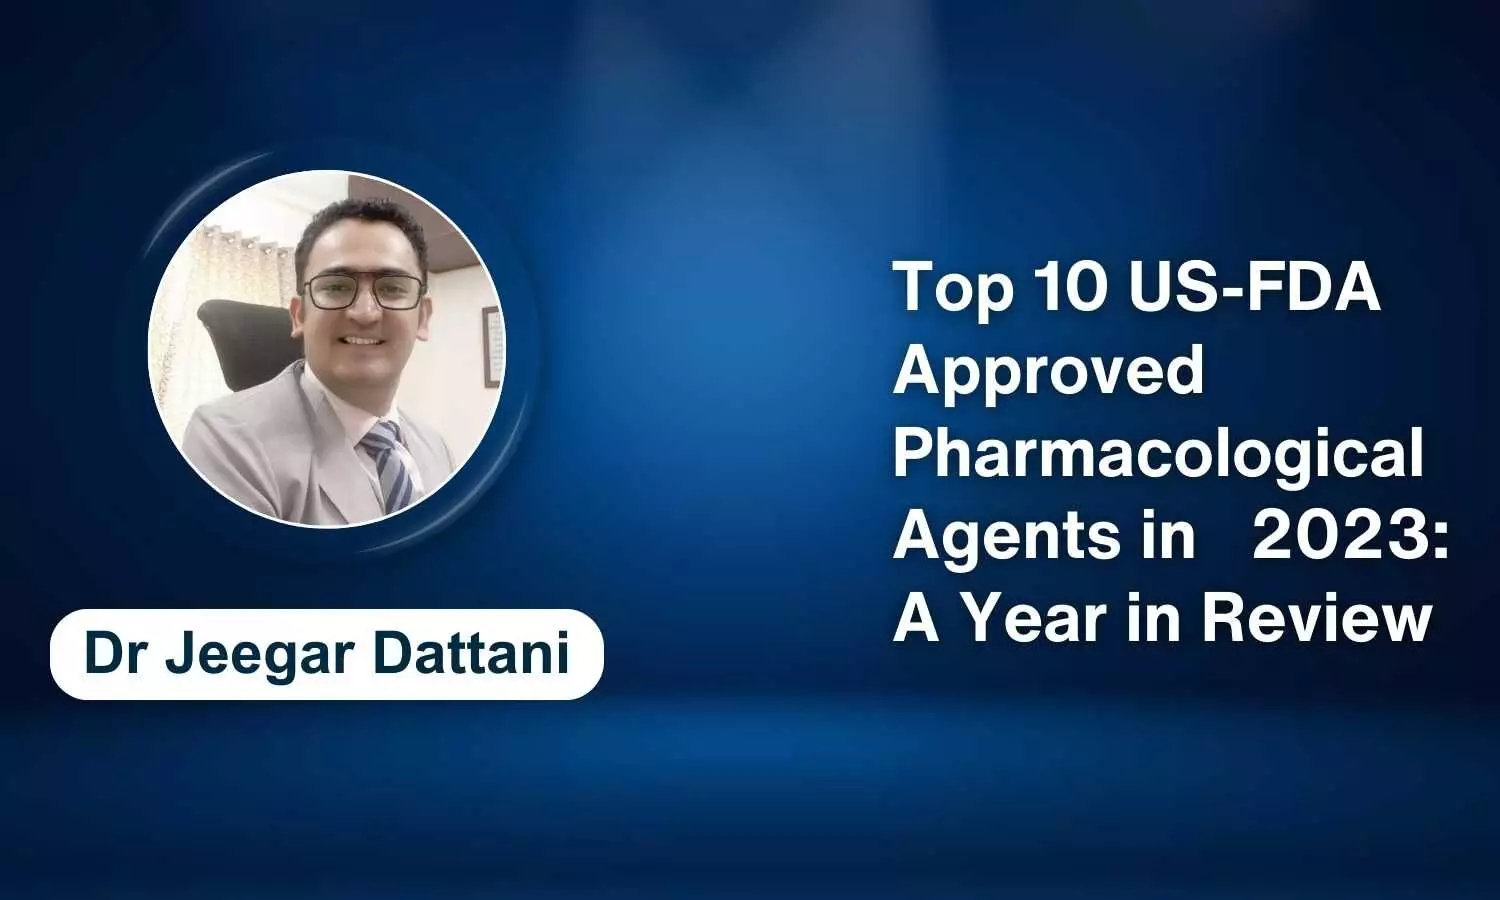 Top Ten US-FDA Approved Pharmacological Agents in 2023: A Year in Review